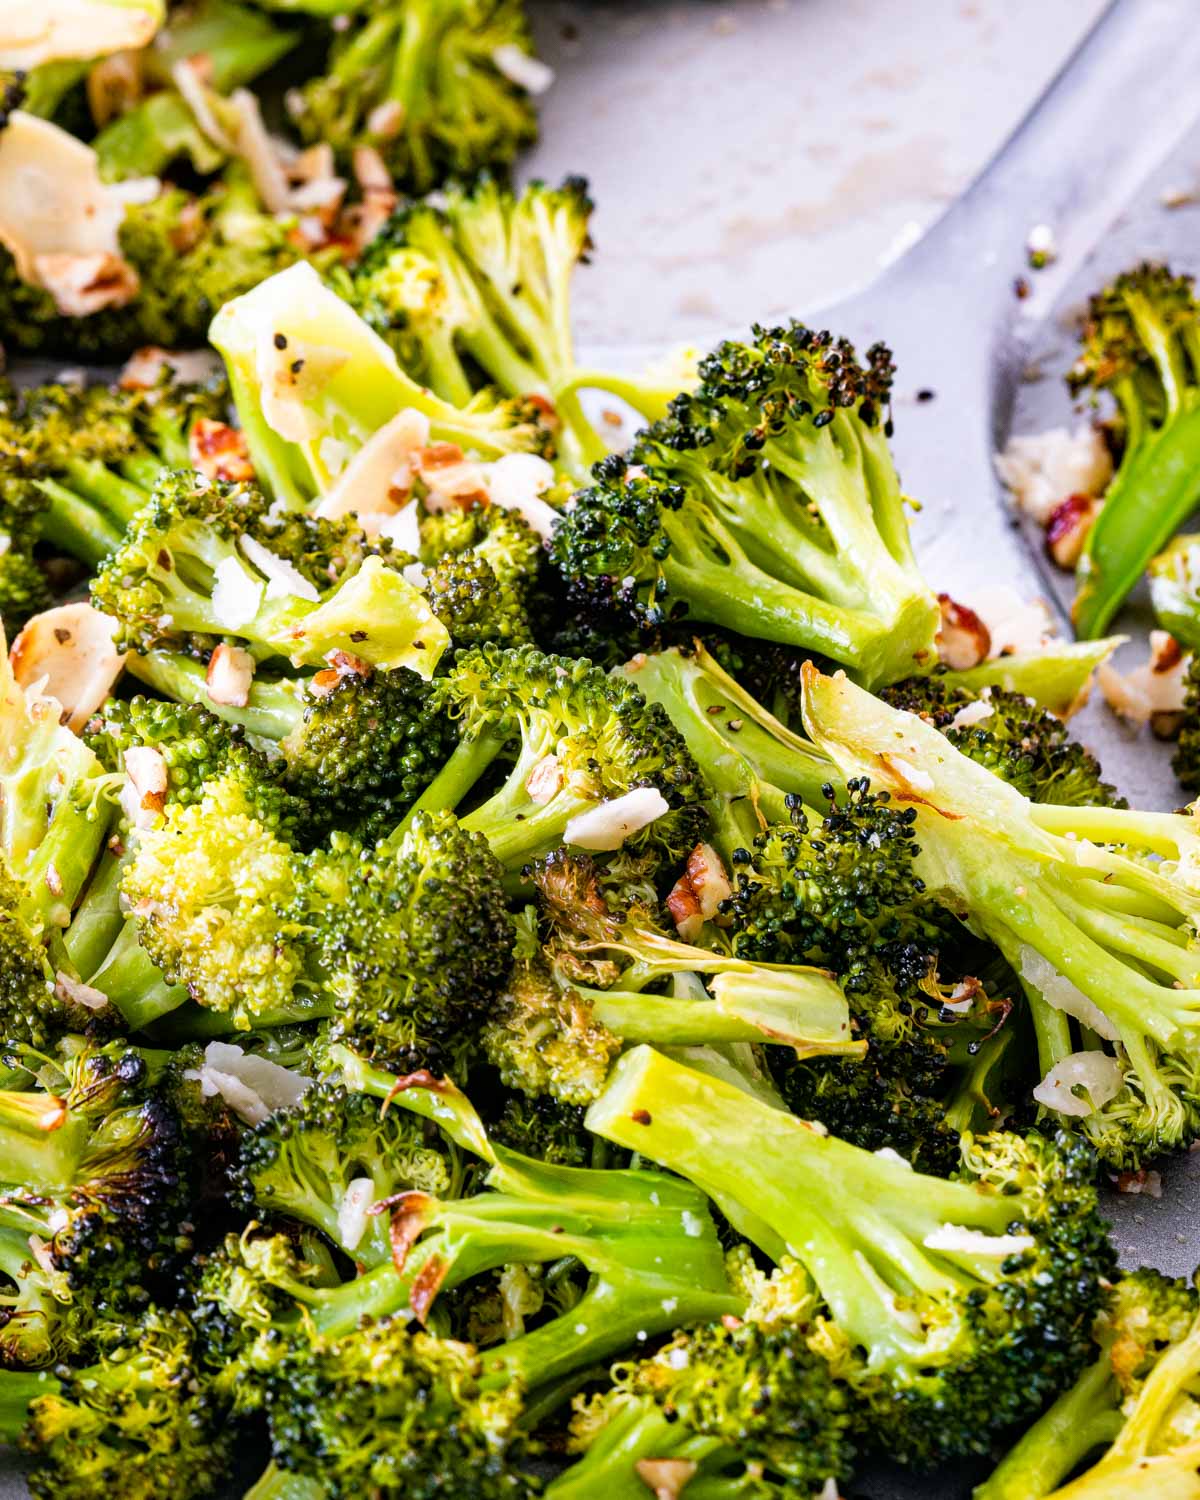 roasted broccoli on a baking sheet with a spatula.